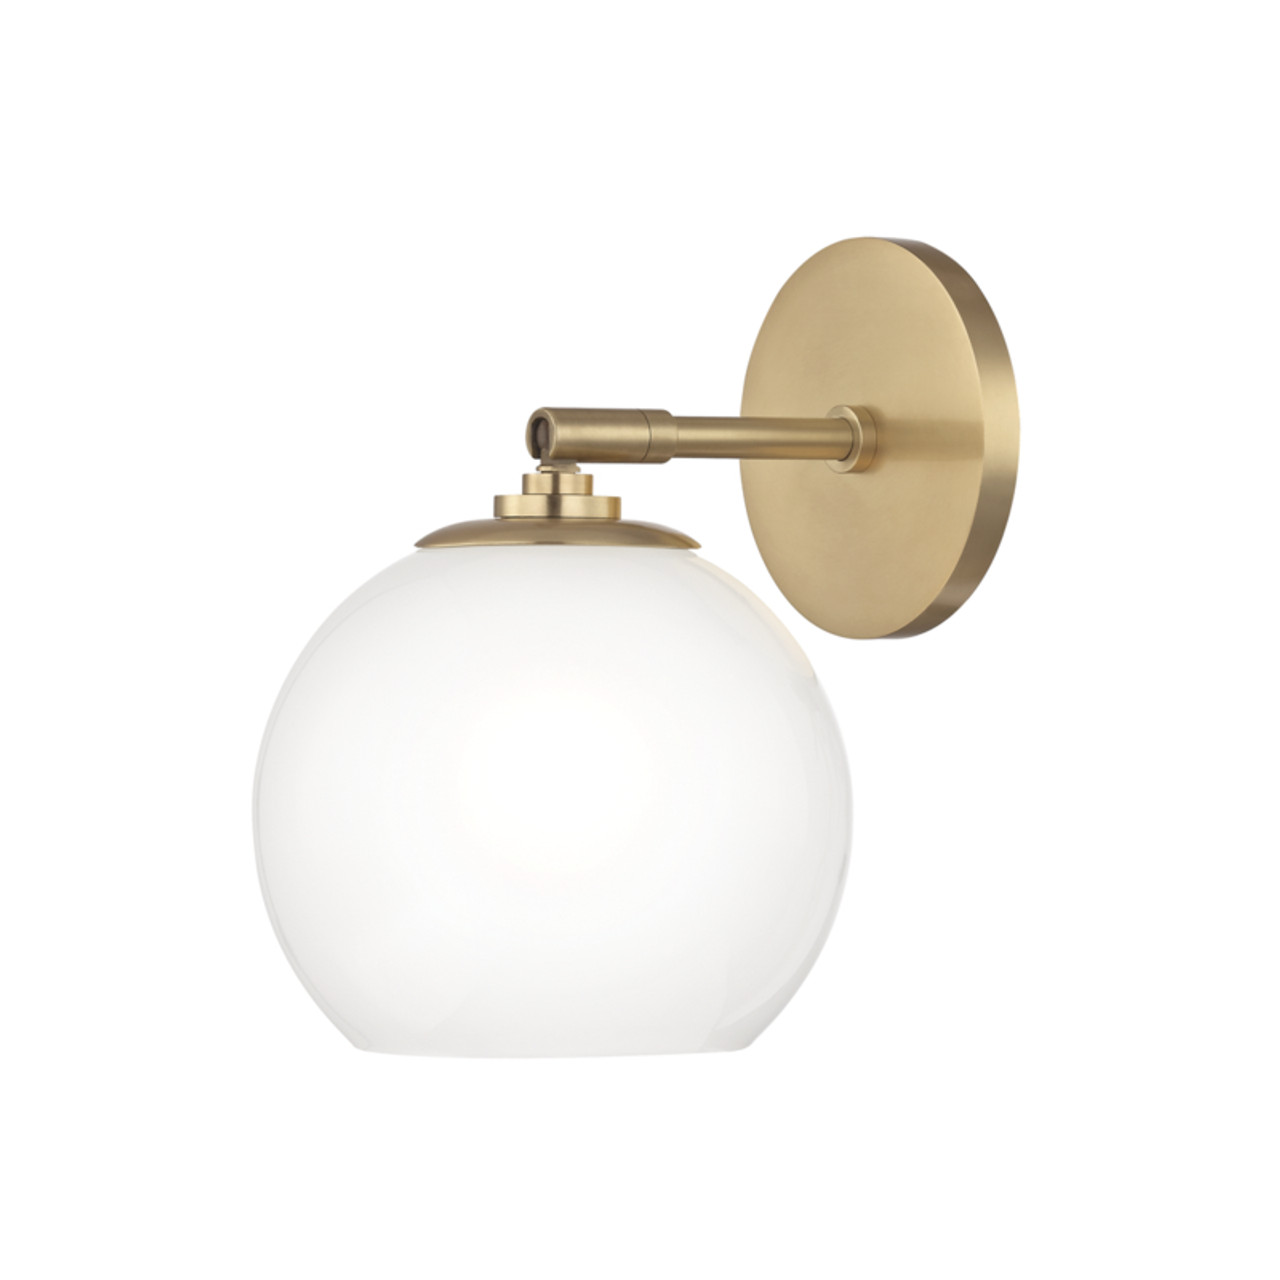 Tilly LED Wall Sconce in Aged Brass